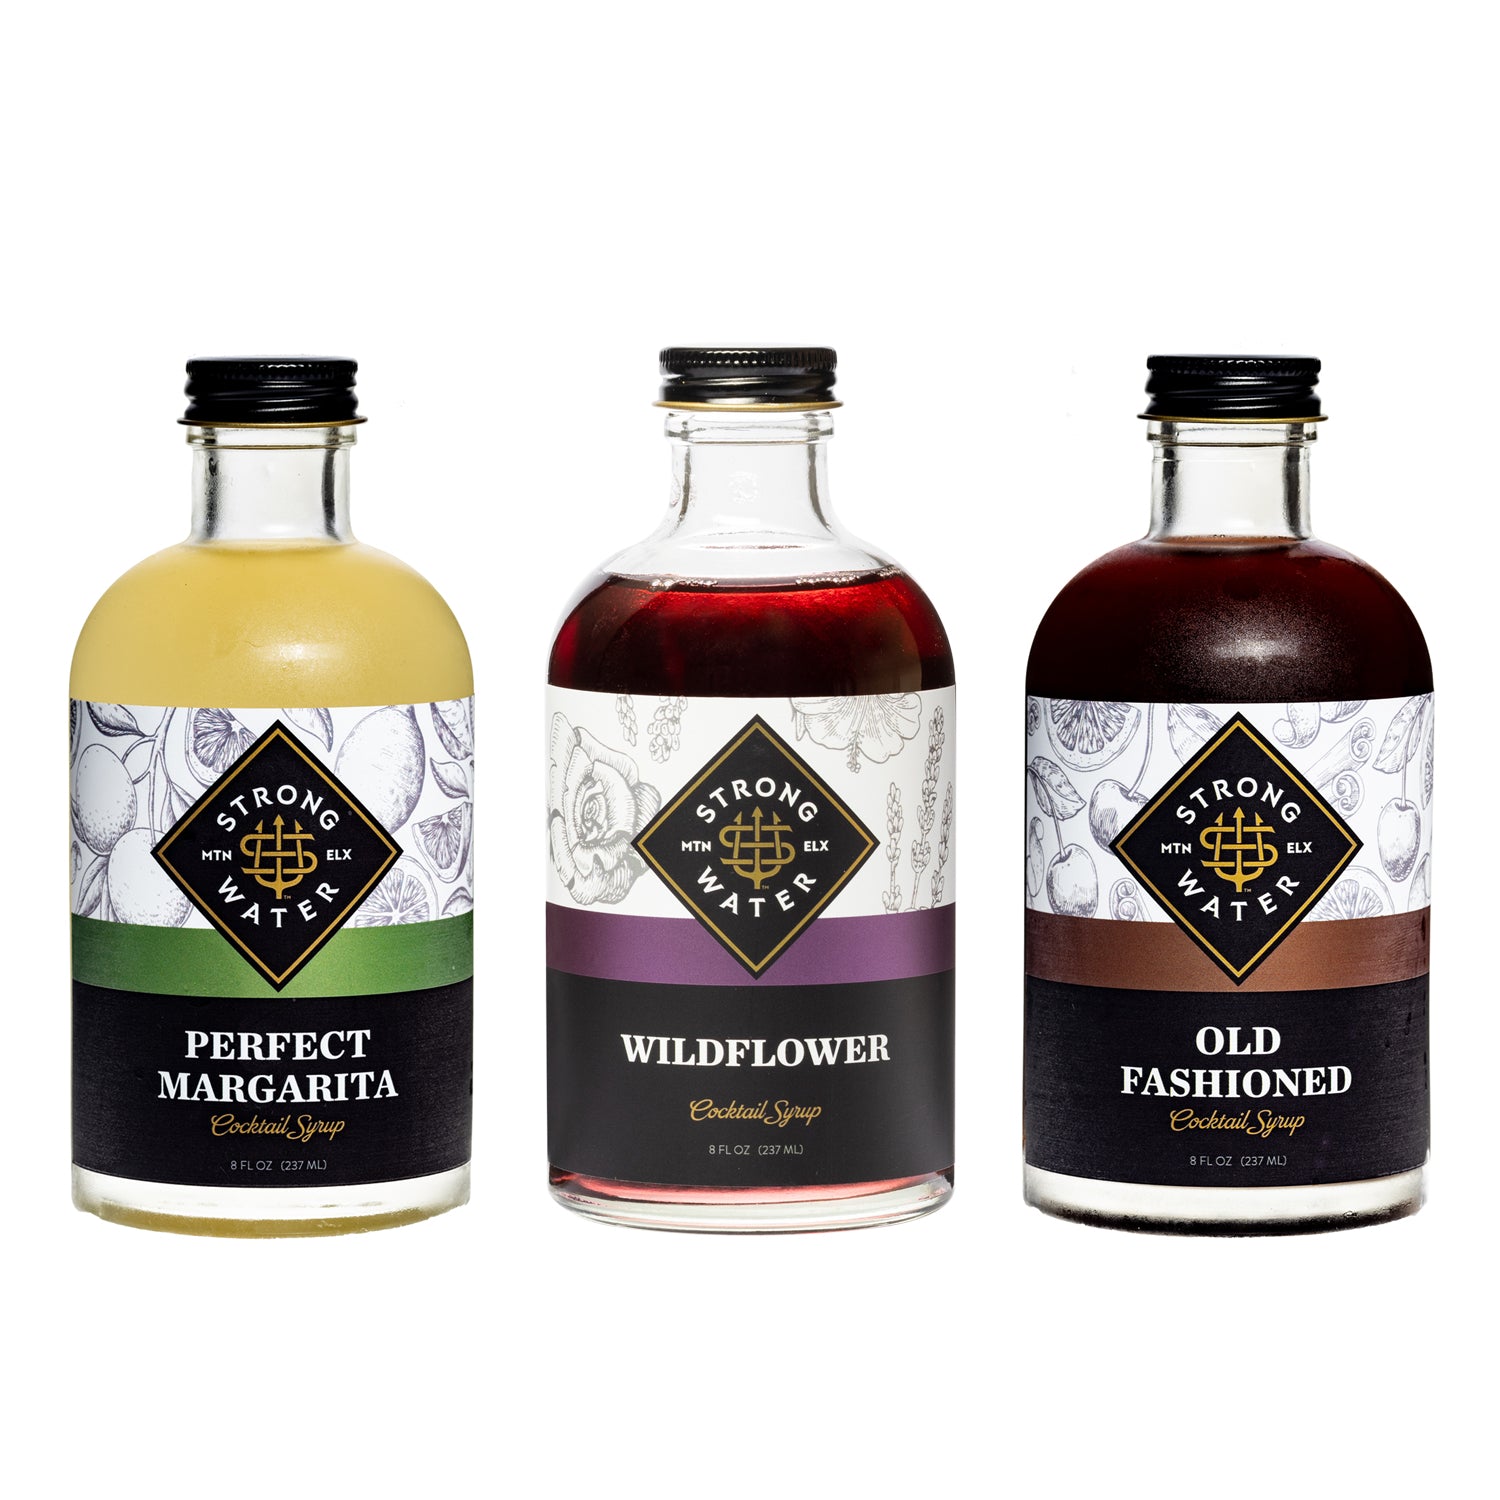 Cocktail Syrup Gift Set - Strongwater